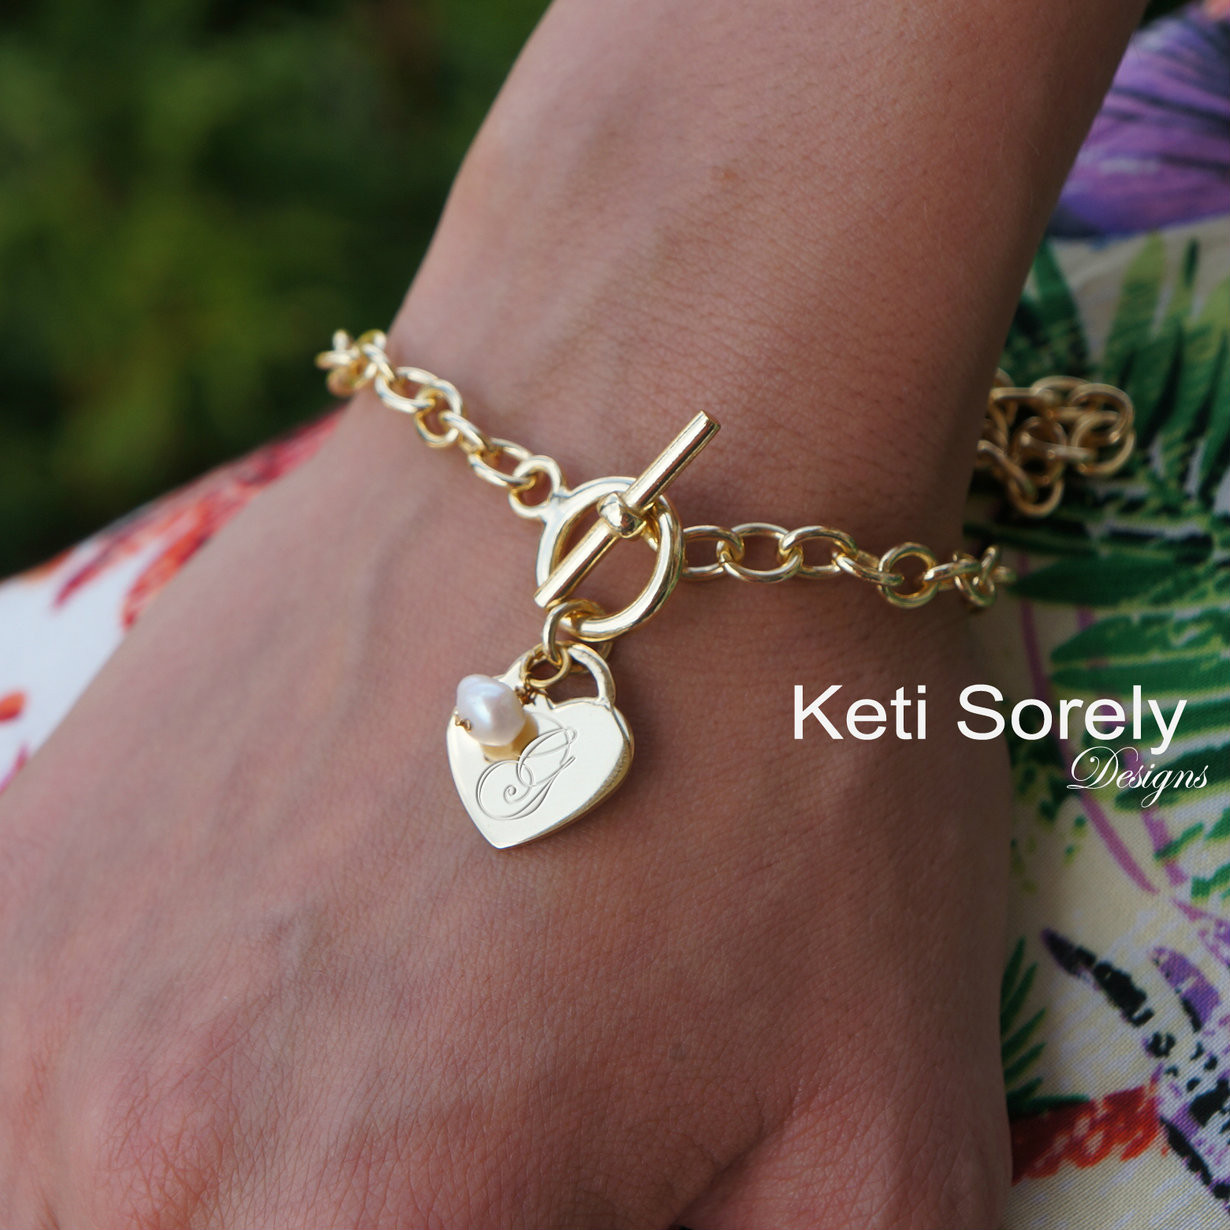 Personalized Chain Link Bracelet with Engraved Charms in Sterling Silver